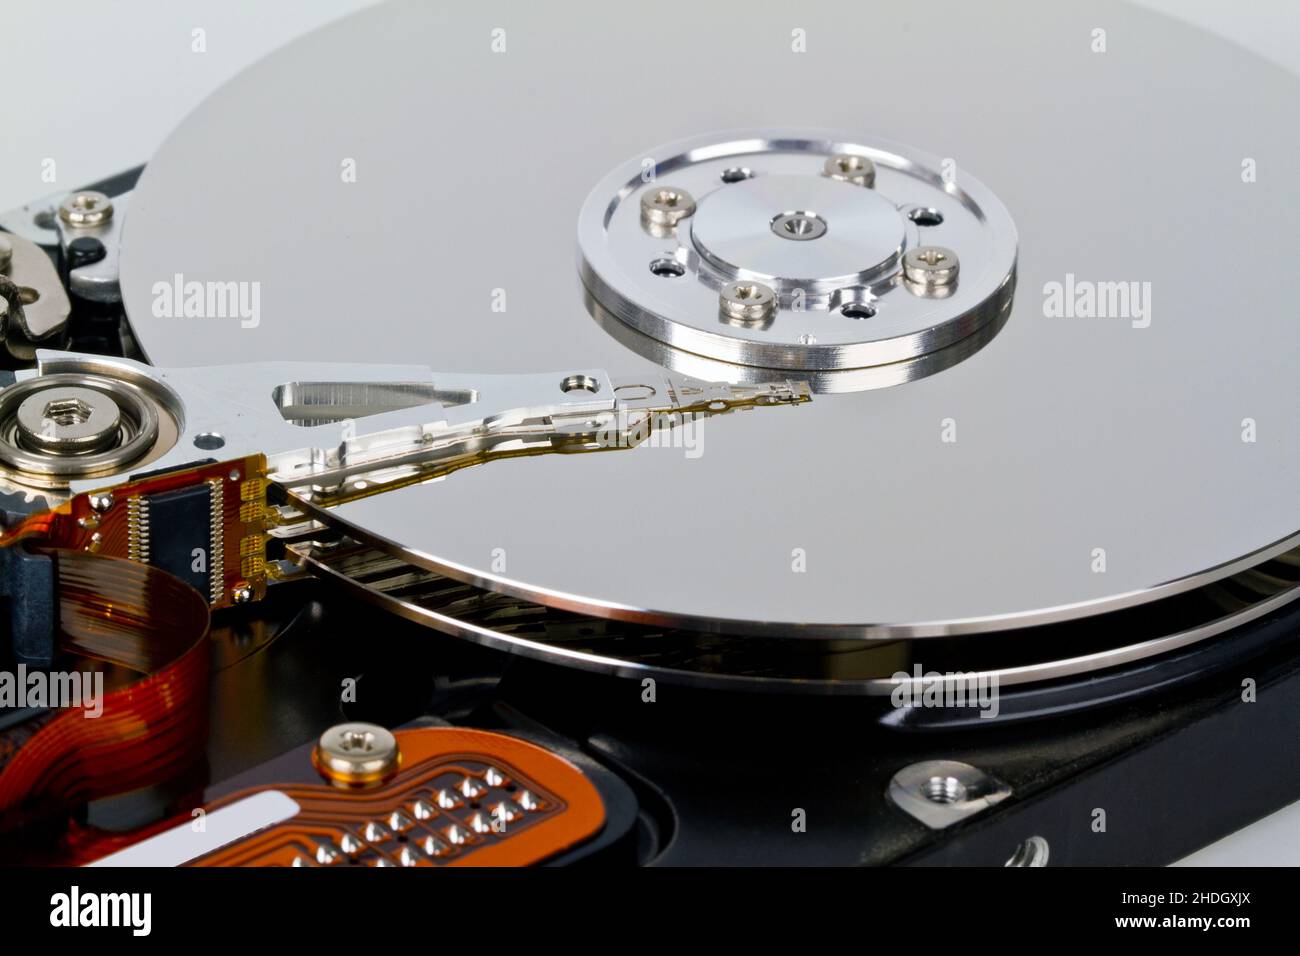 hard drive, disk read, hard drives, disk reads Stock Photo